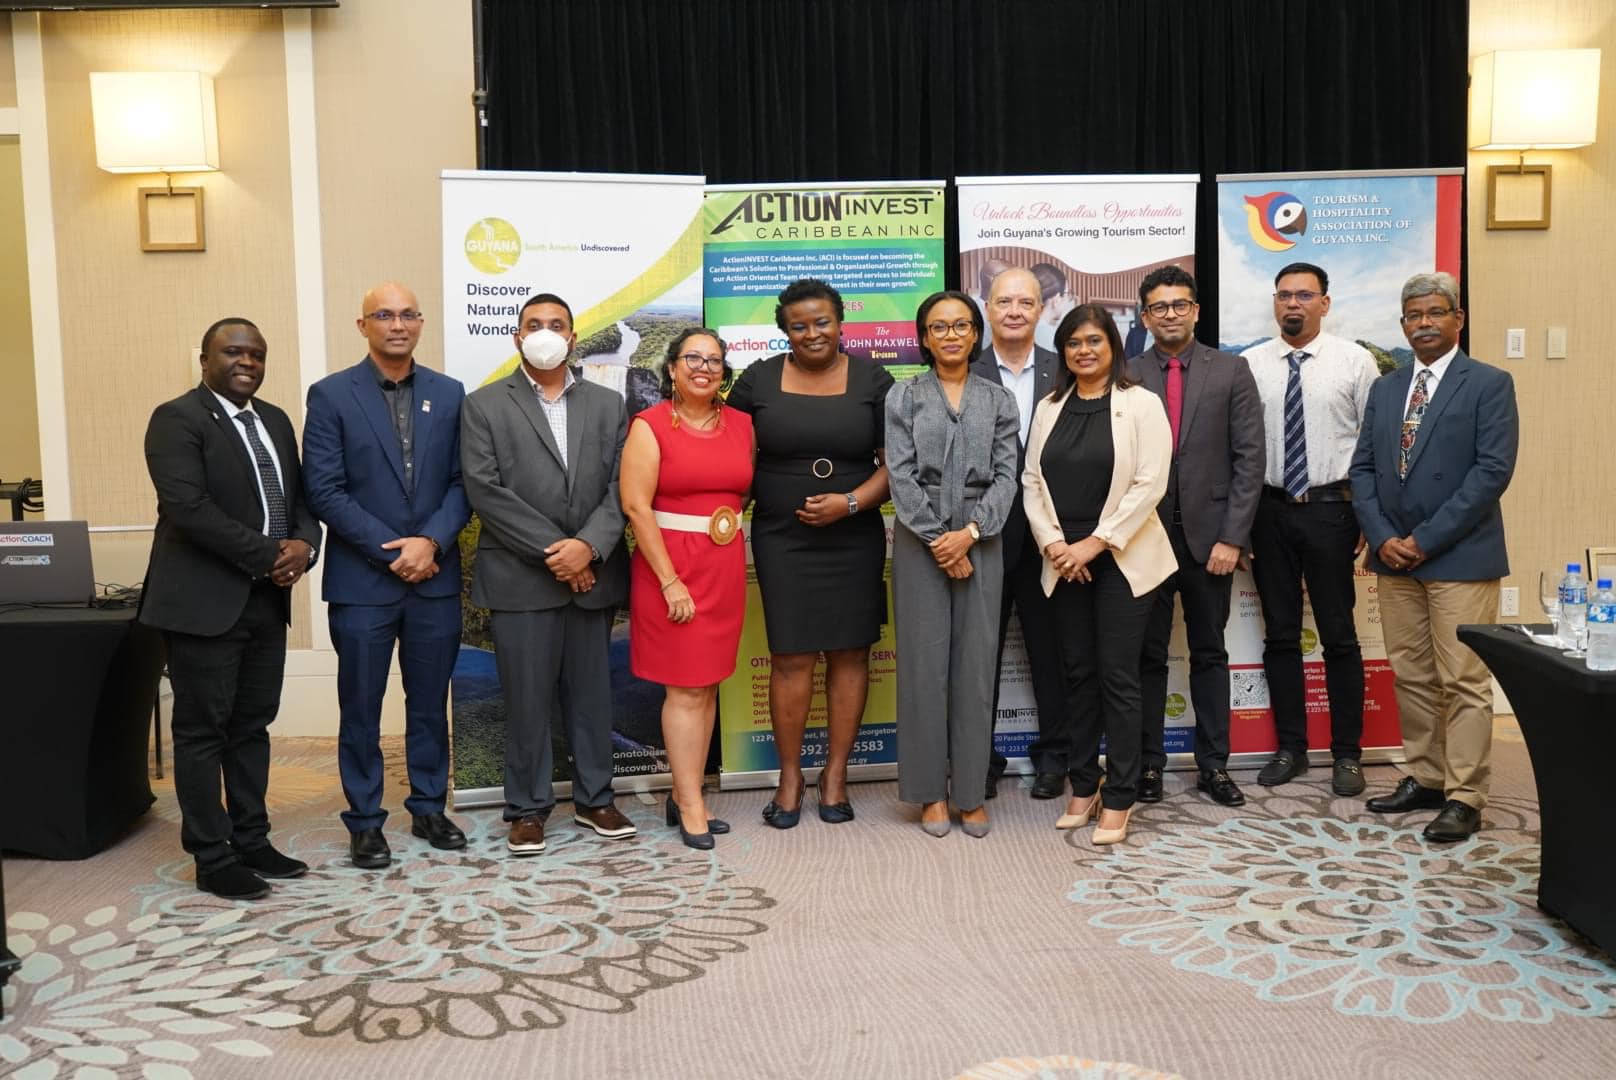 Chairman of ActionInvest Caribbean Inc, Dr. Vishnu Doerga (second from left) with Minister of Tourism, Industry and Commerce, Oneidge Walrond along with other stakeholders from the tourism industry during the launch of the diploma programme yesterday. (Photo credit: Ministry of Tourism, Industry and Commerce)